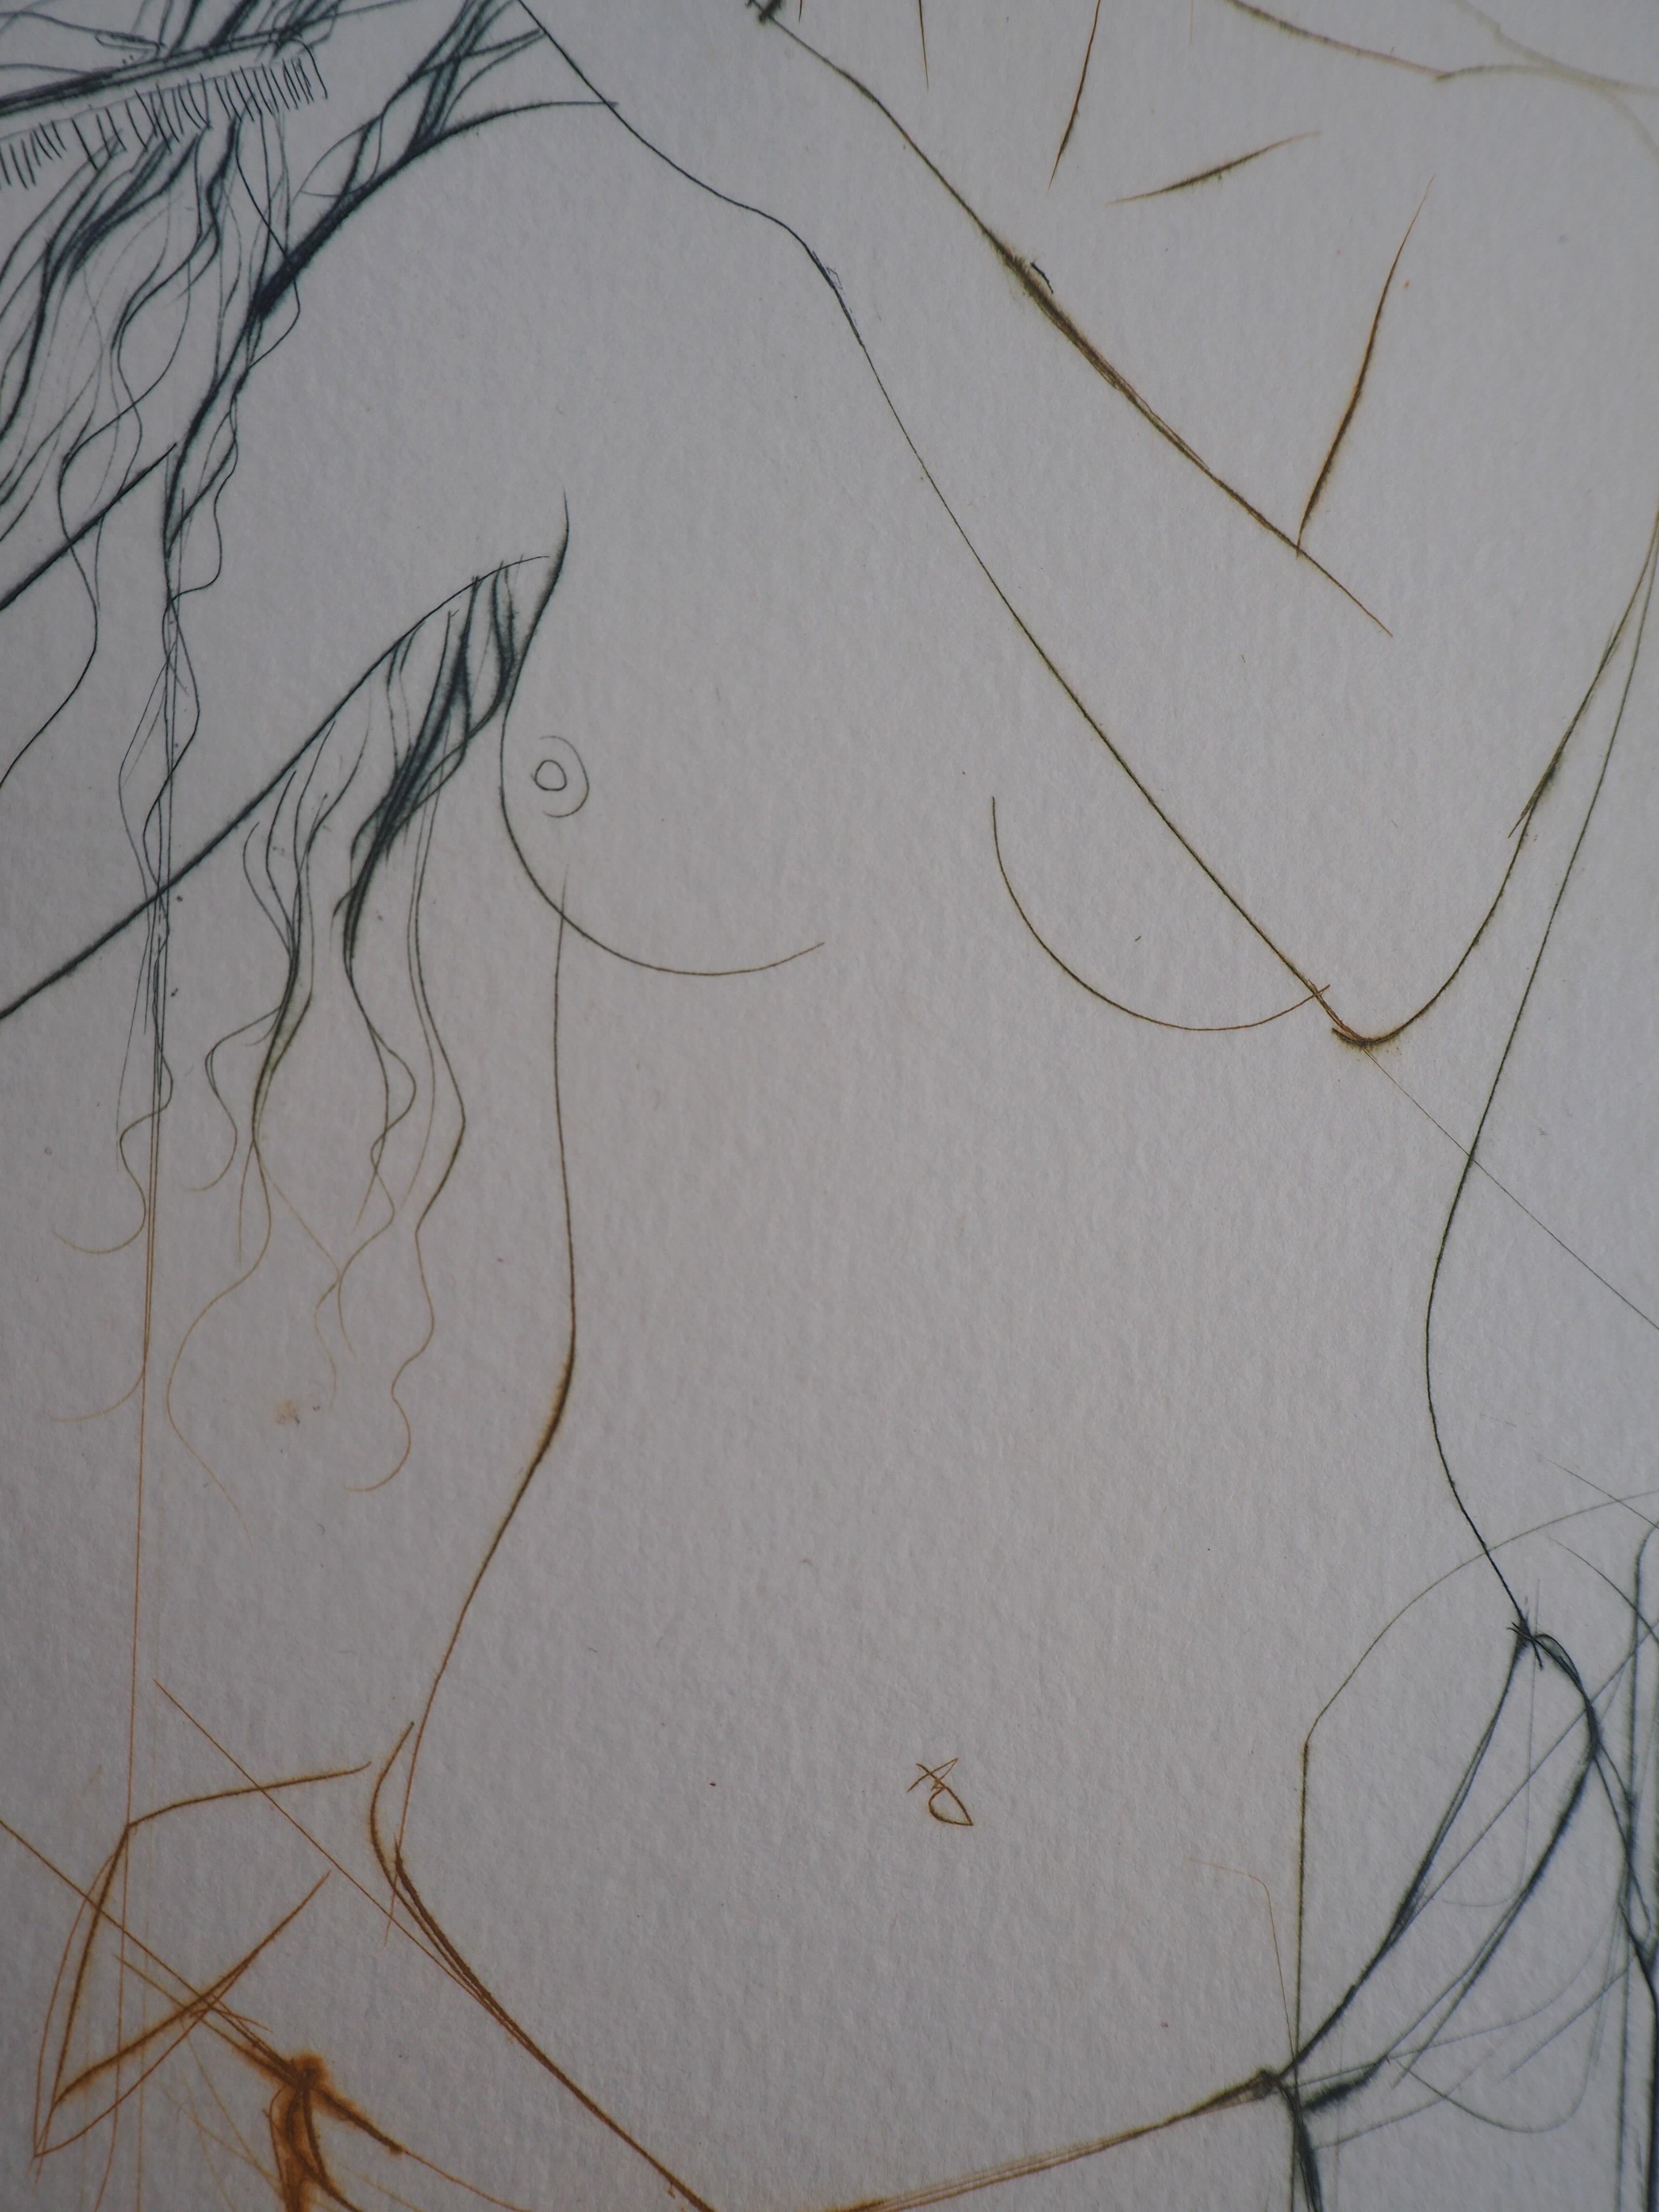 Nude Combing Her Hair - Original Etching, Handsigned For Sale 3